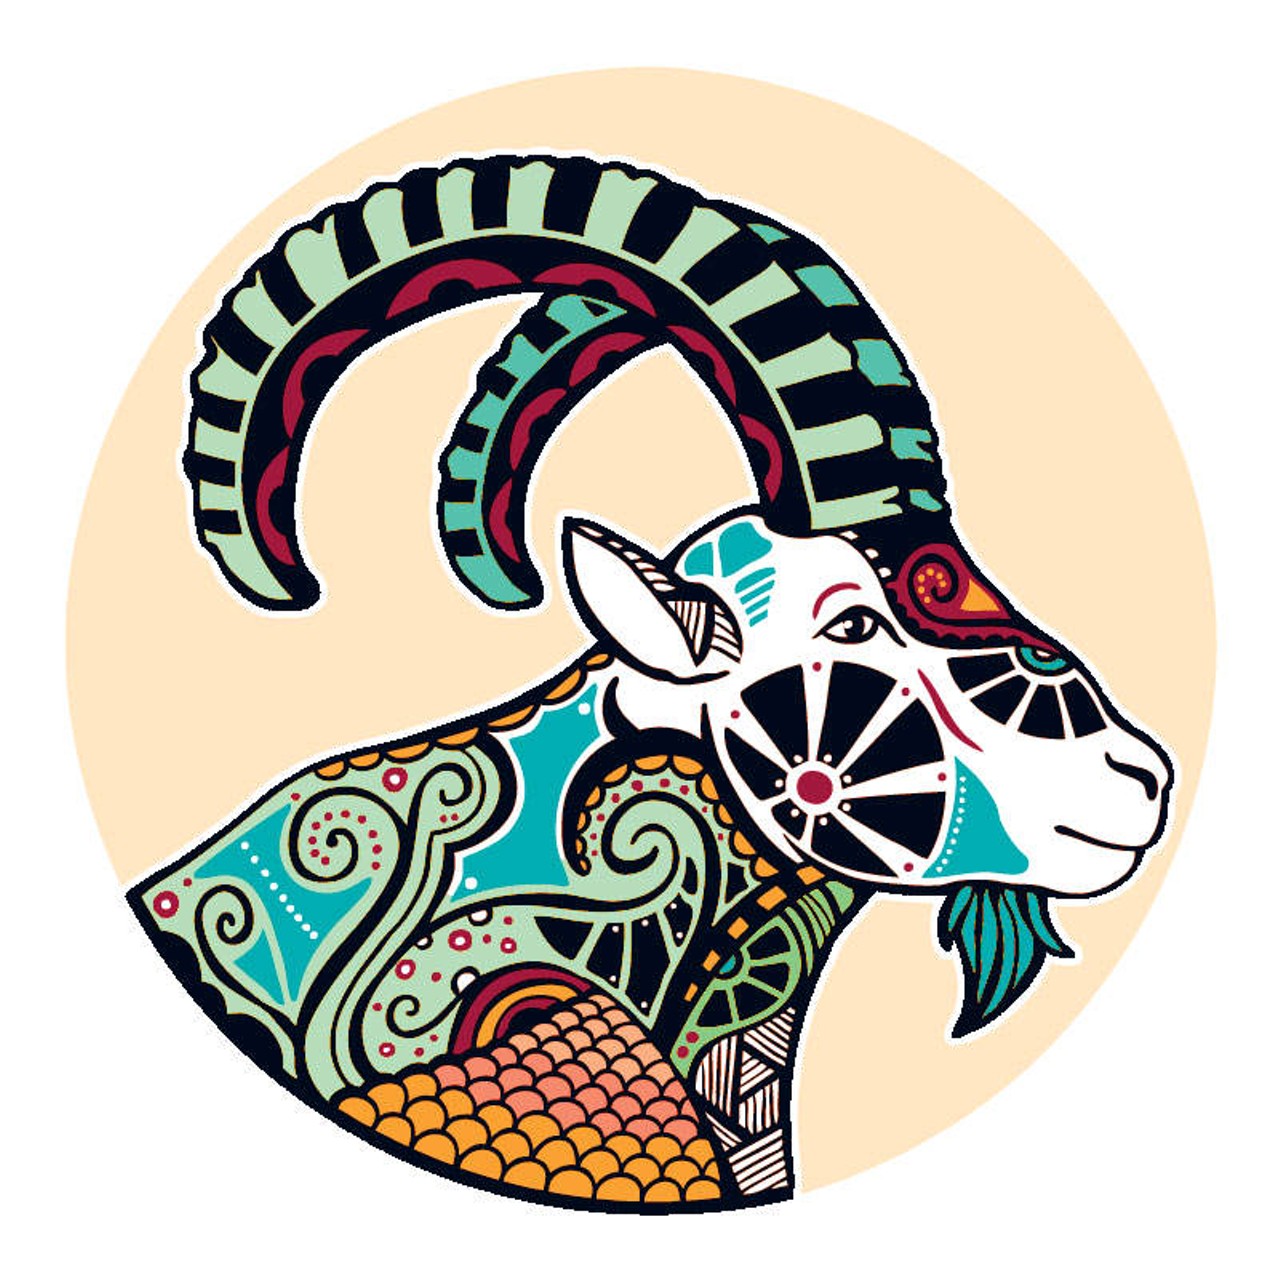 CAPRICORN: December 21 - January 20
Give everything time to pan out. You have been this sure about things many times before. I am not here to scare you &#151; I just know how things work. When you want something too much, you wind up pushing it away. Be mindful of your tendency to think that confidence is the key to success. You could be puffing things up, to overcompensate for the fact that this might not pan out. A little advice from someone who knows more about things than you do might help. Taking your blinders off won't subtract anything from a situation that could turn into a dream come true.